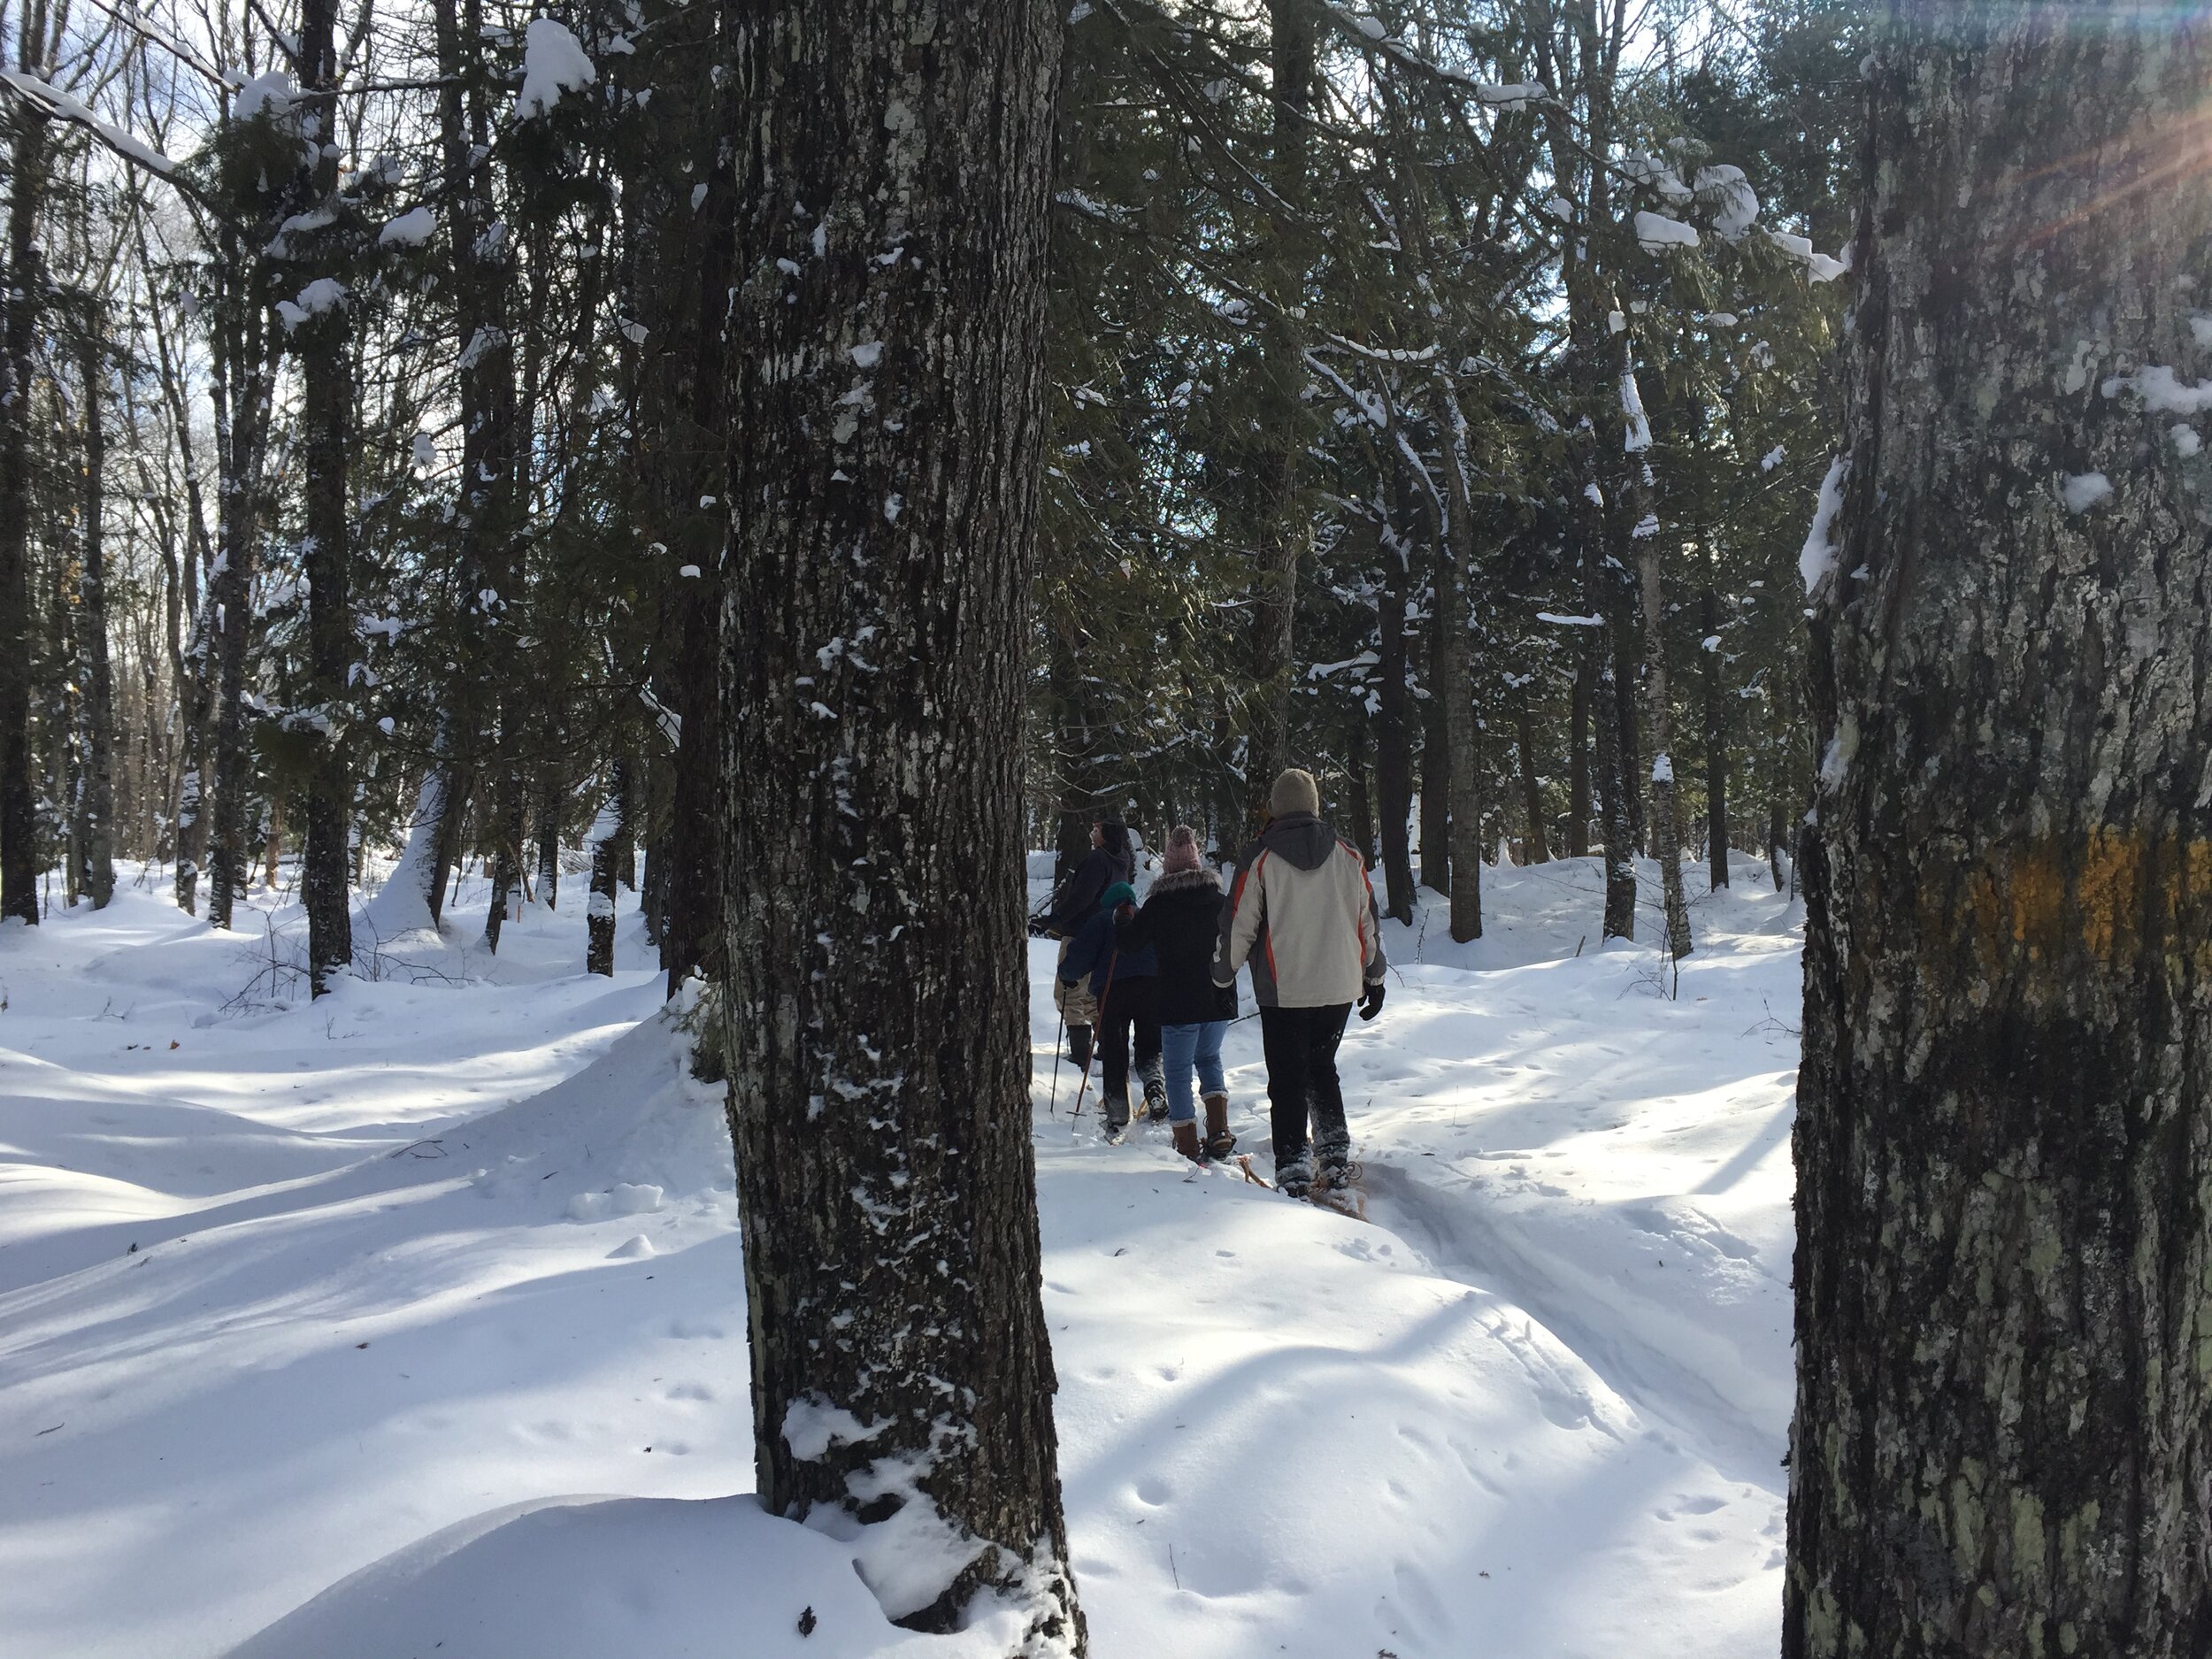 Snowshoe trail is now well packed